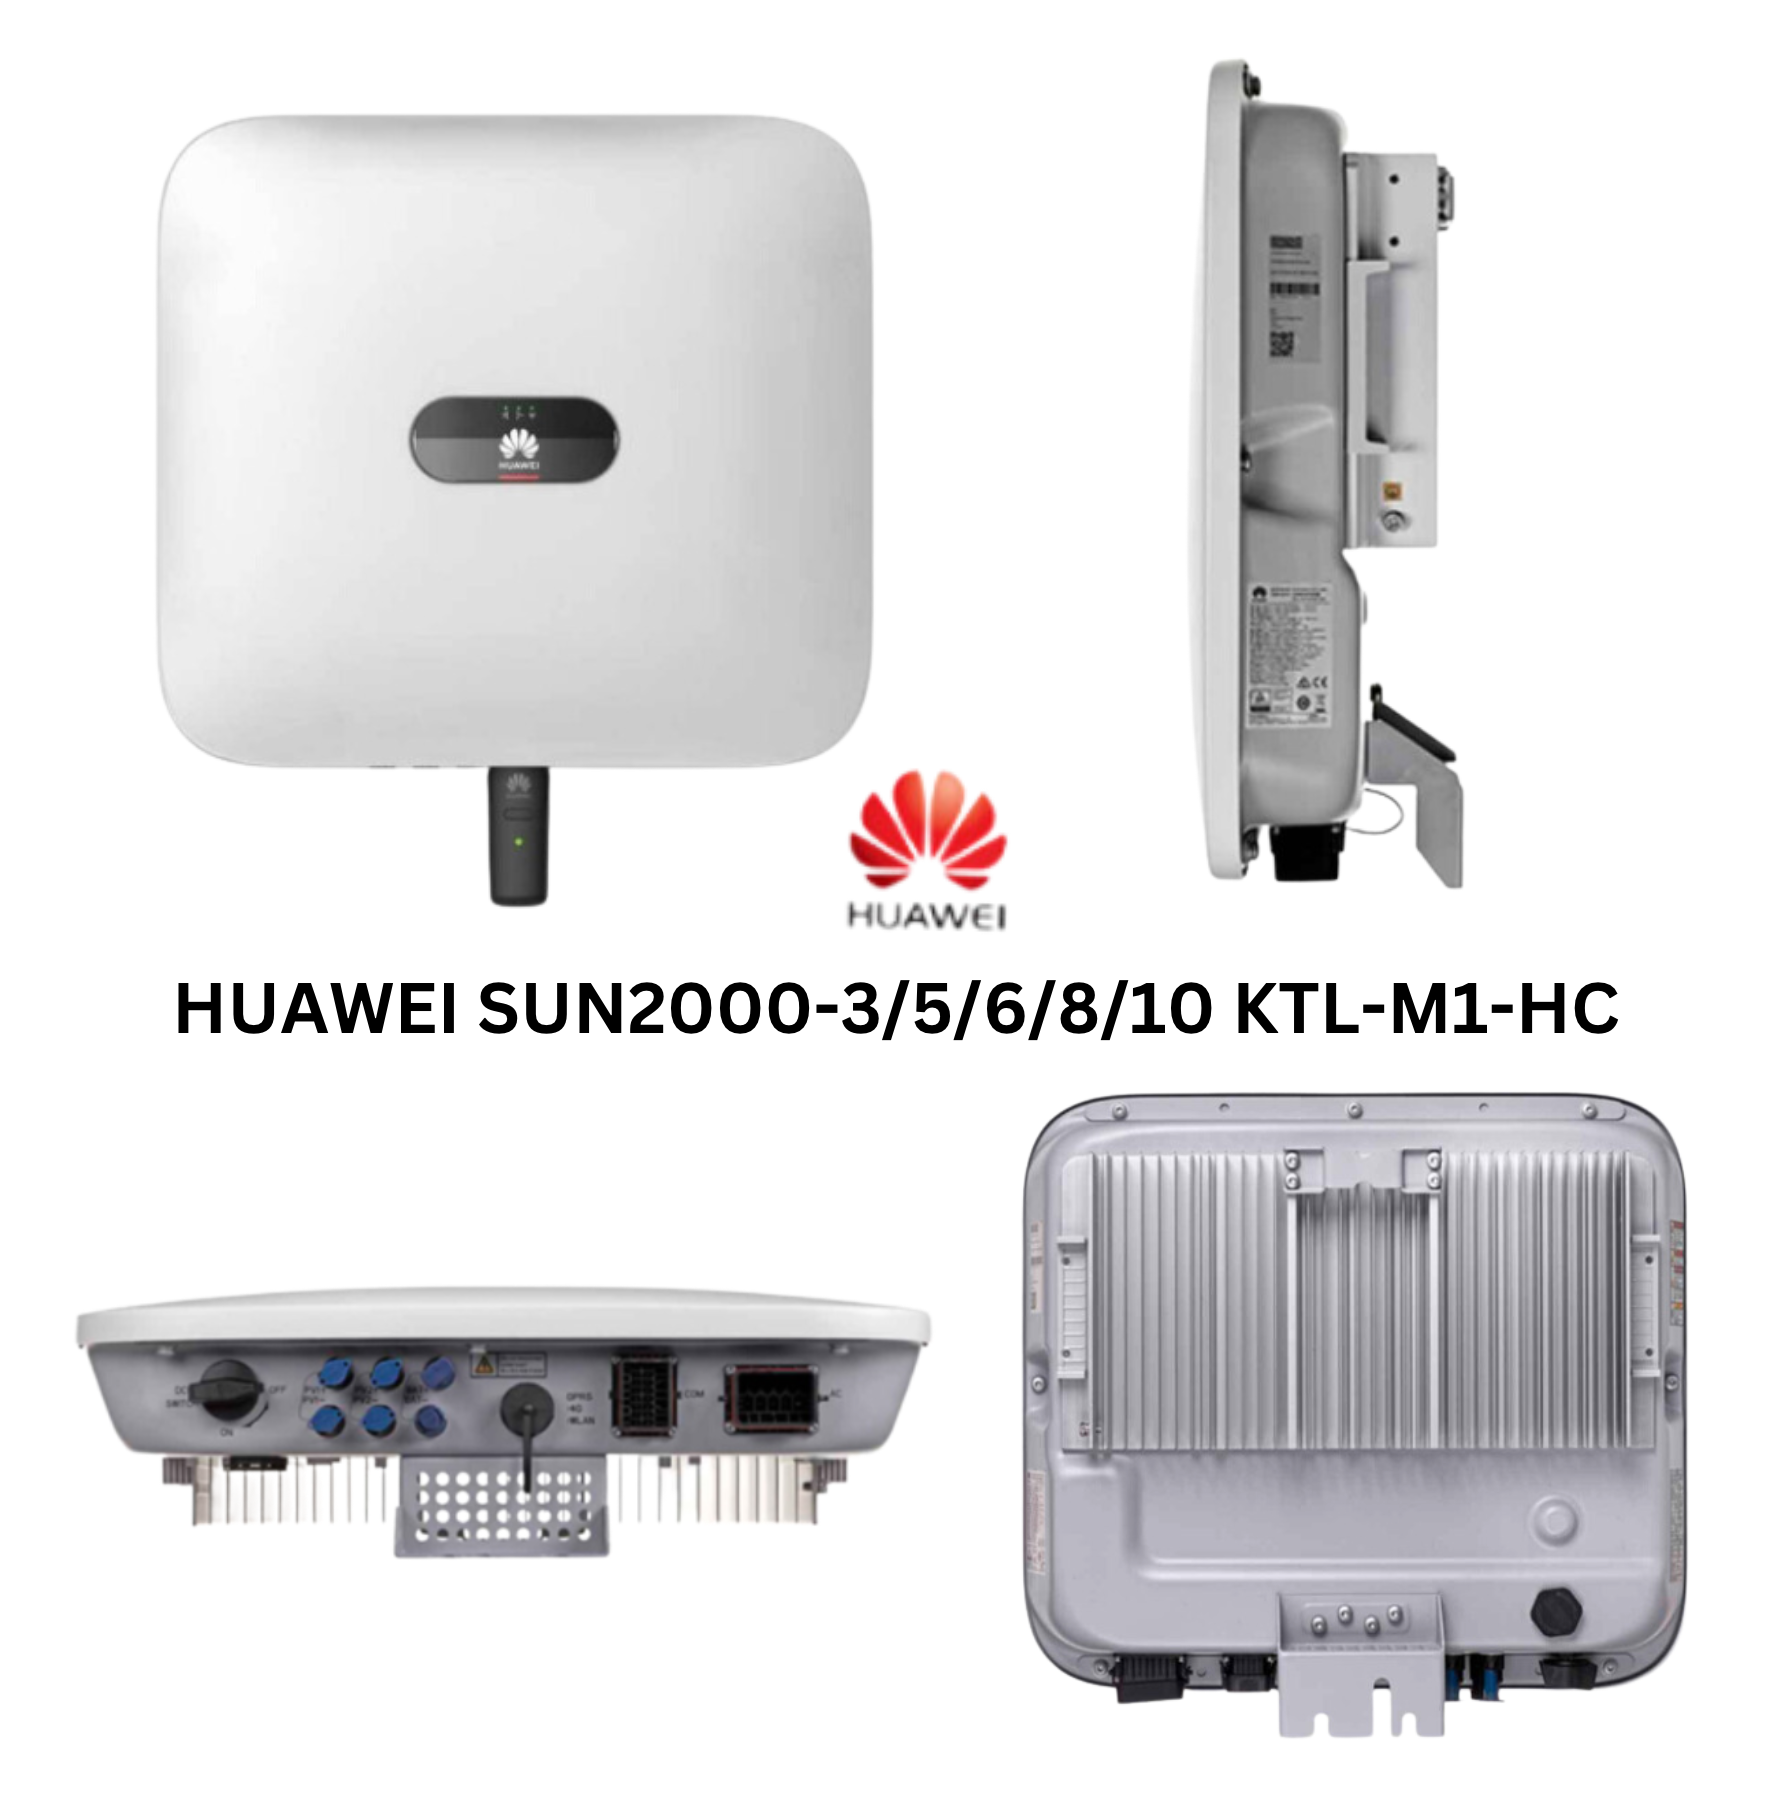 Huawei Ensemble Photovoltaïque Complet - [10kW + 10kWh]